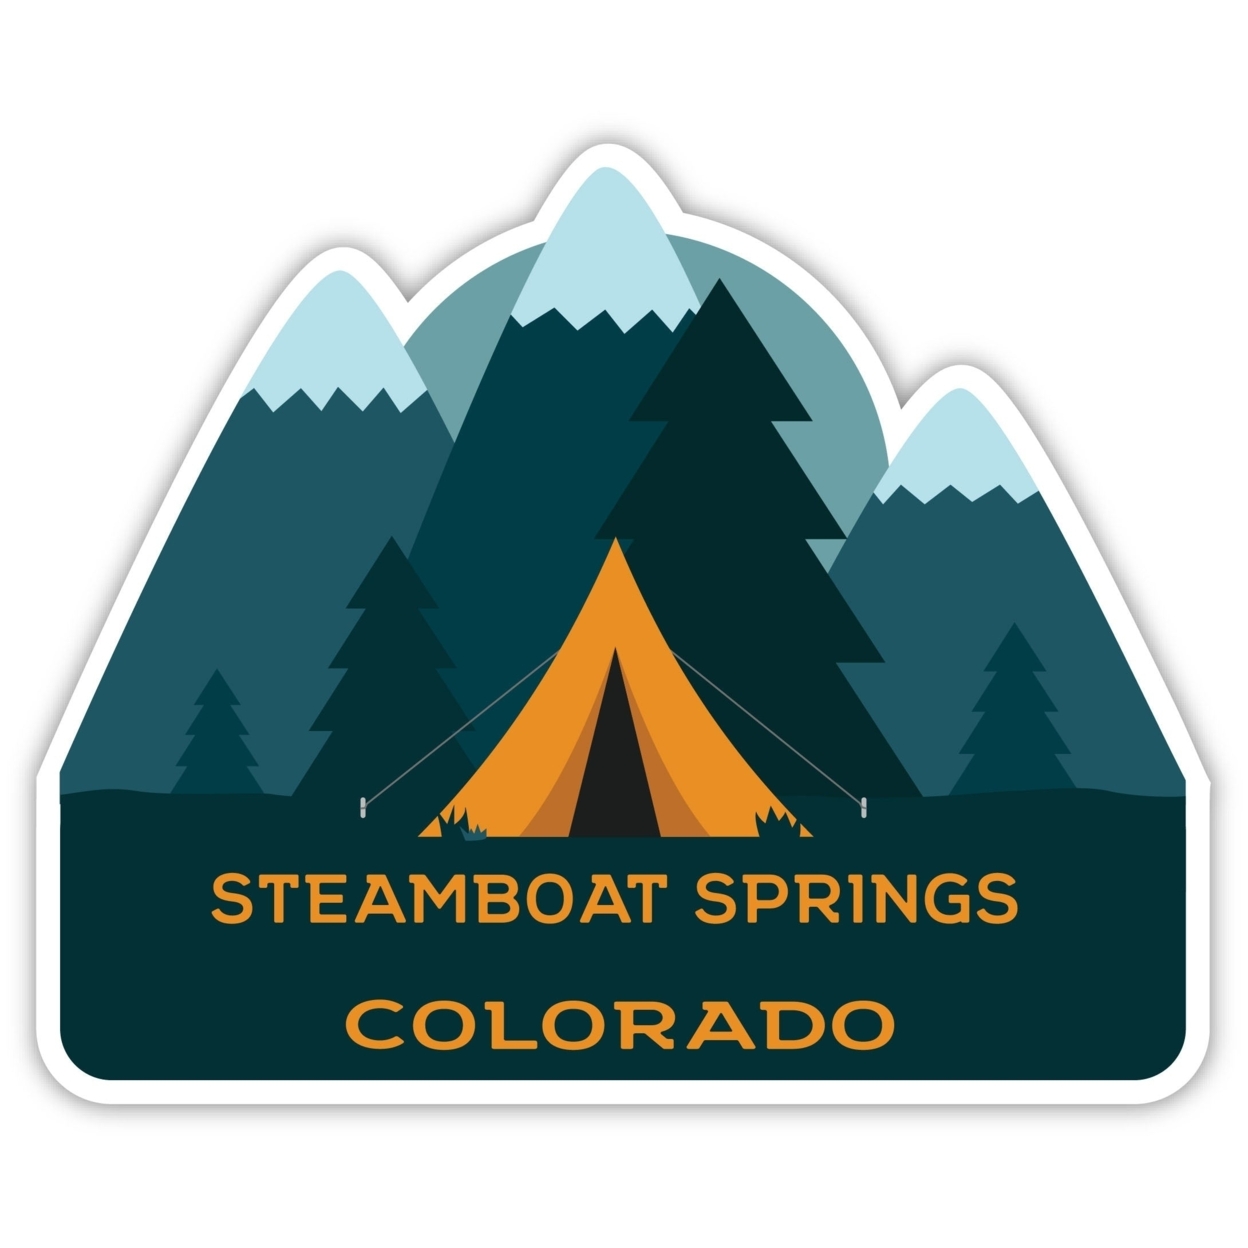 Steamboat Springs Colorado Souvenir Decorative Stickers (Choose Theme And Size) - Single Unit, 4-Inch, Camp Life